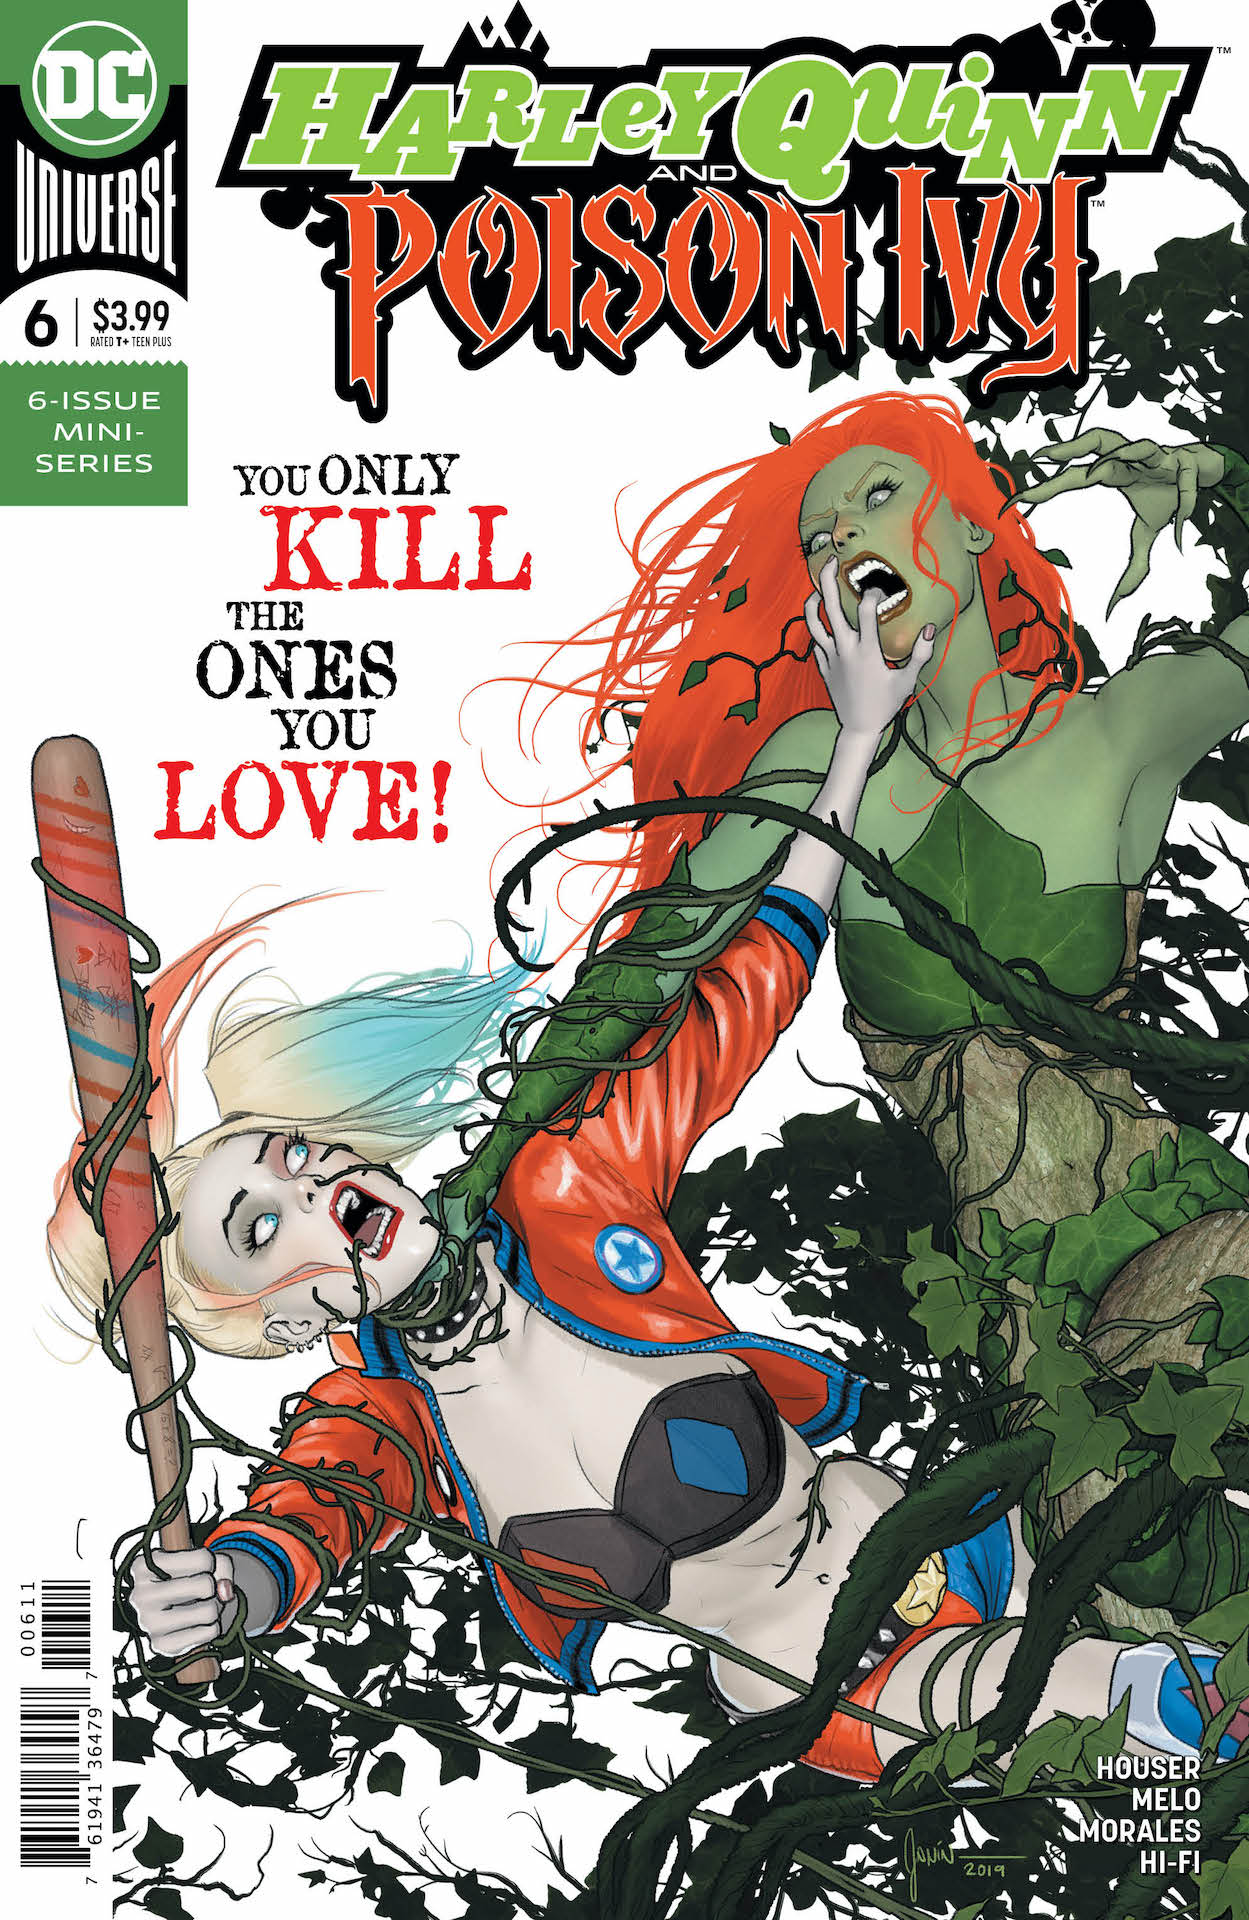 DC Preview: Harley Quinn & Poison Ivy (2019-) #6